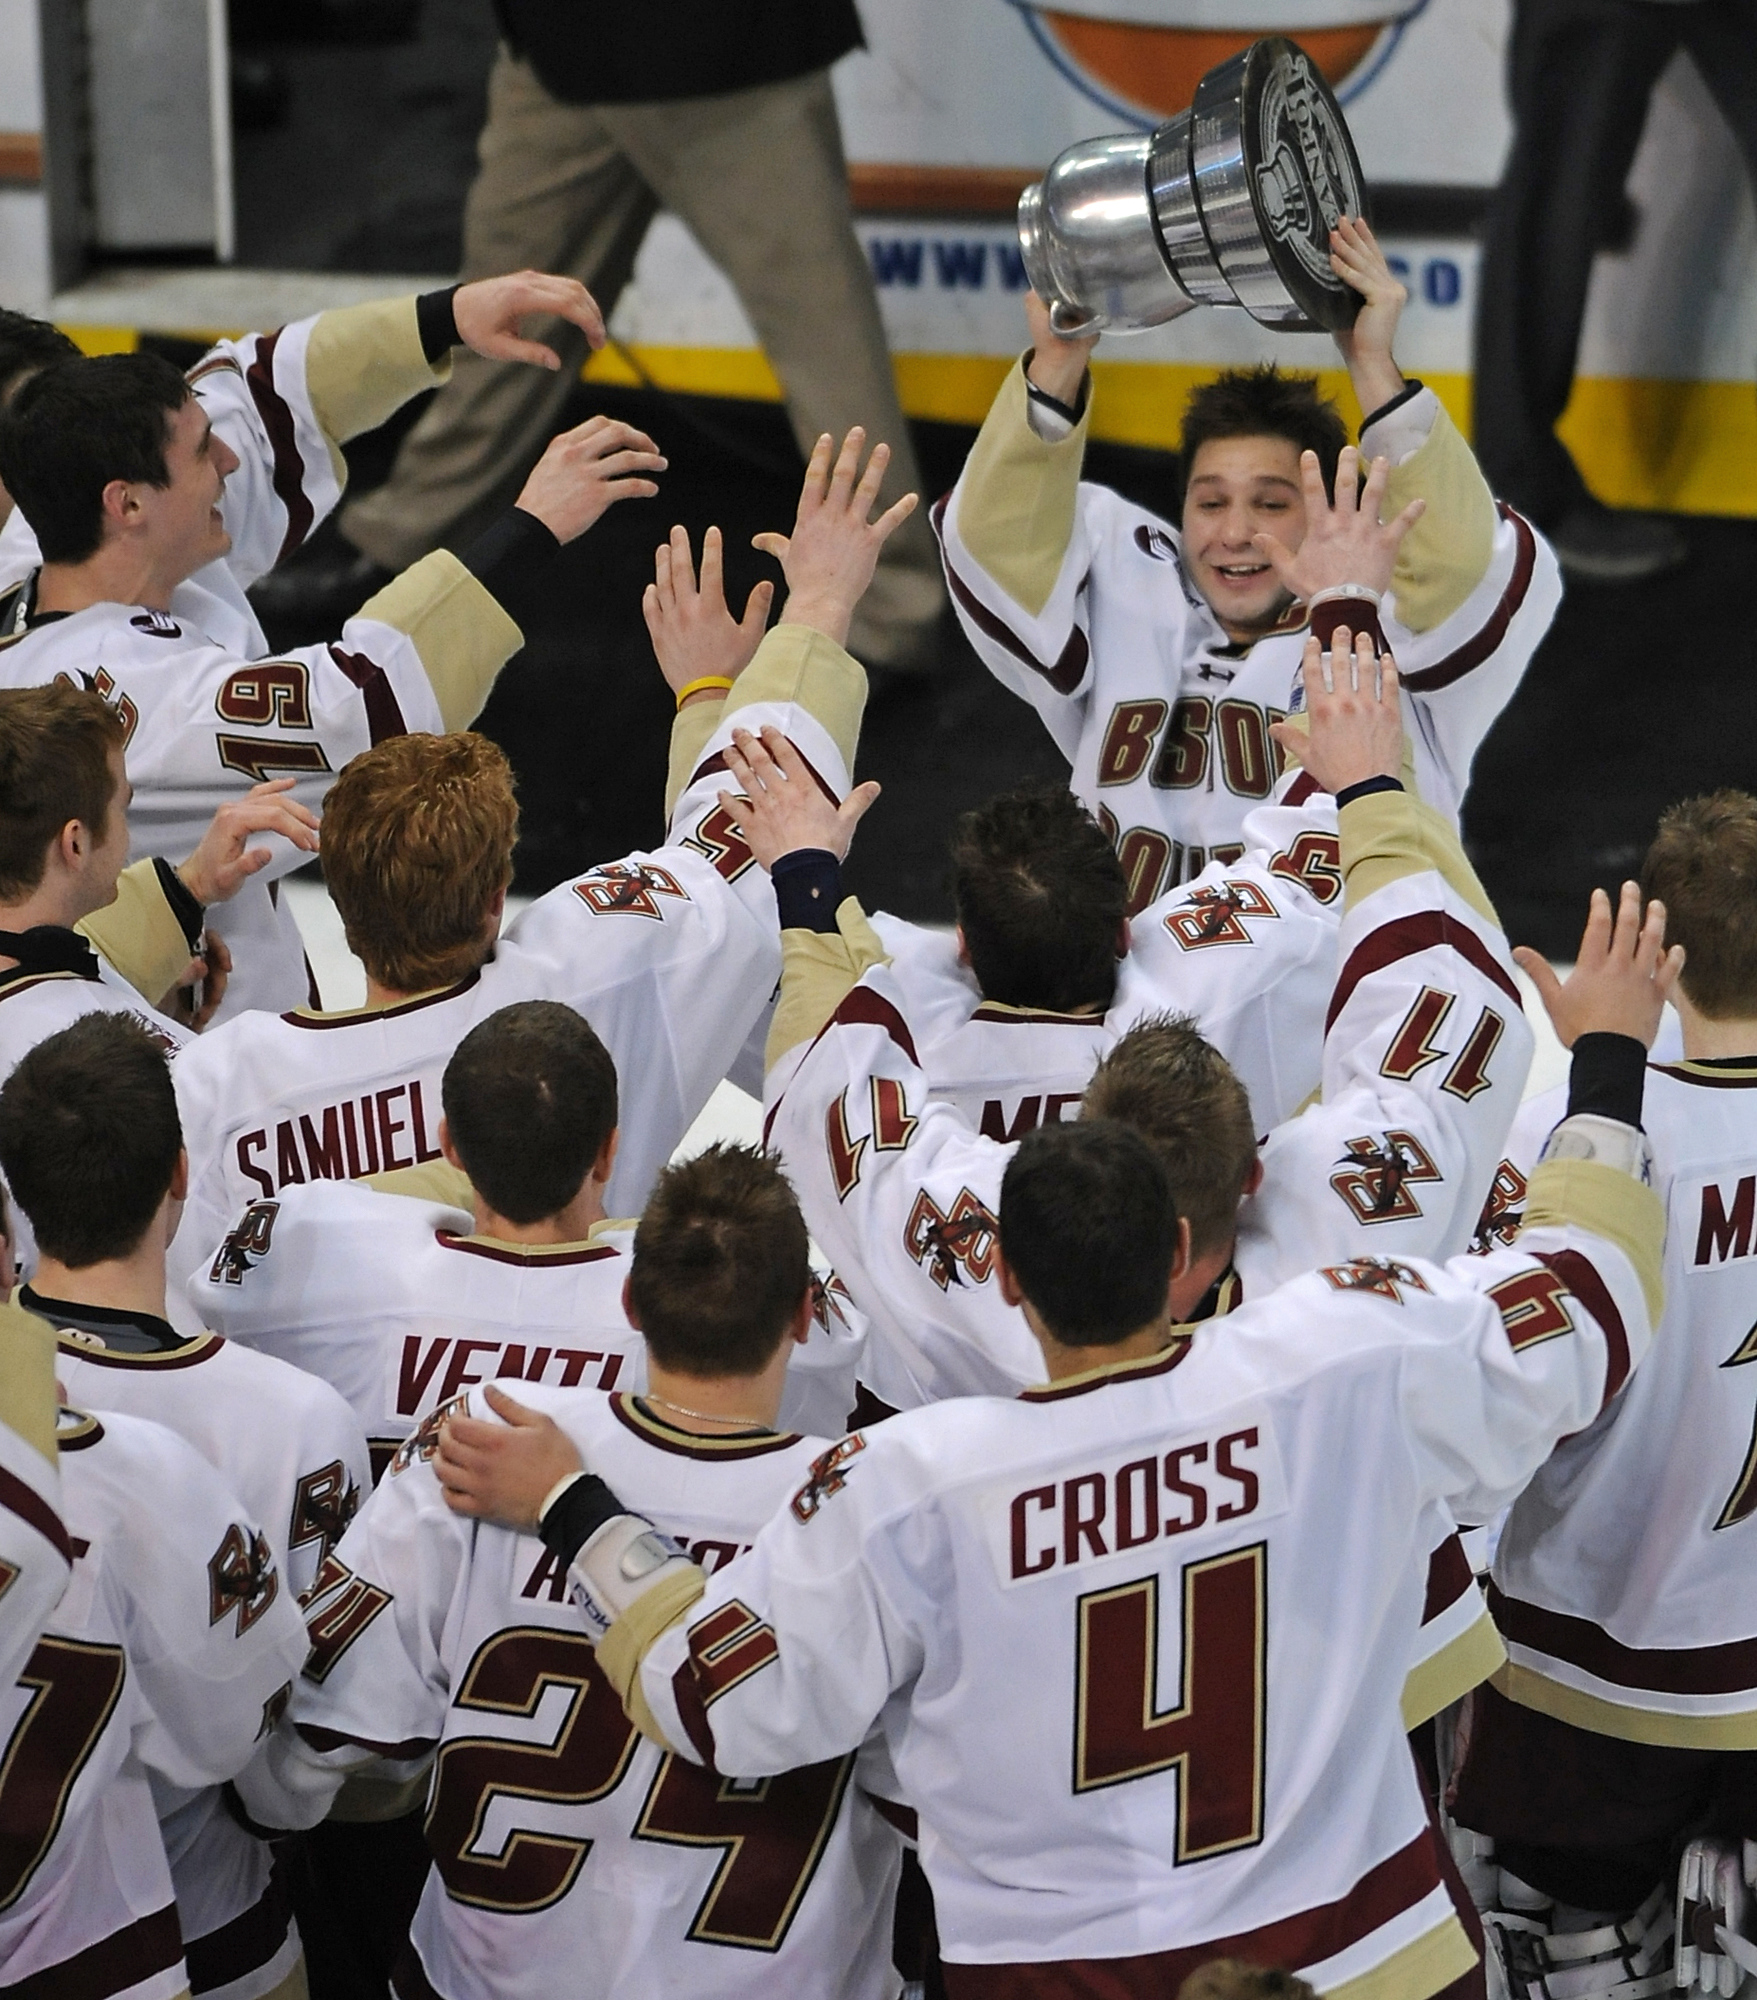 (Boston, MA) Boston College captain Joe Whitney presents the Beanpot trophy to his teammates after the Eagles defeated Northeastern in overtime during the Championship game of the 59th Beanpot Tournament at the TD Garden on Monday, February 14, 2011.